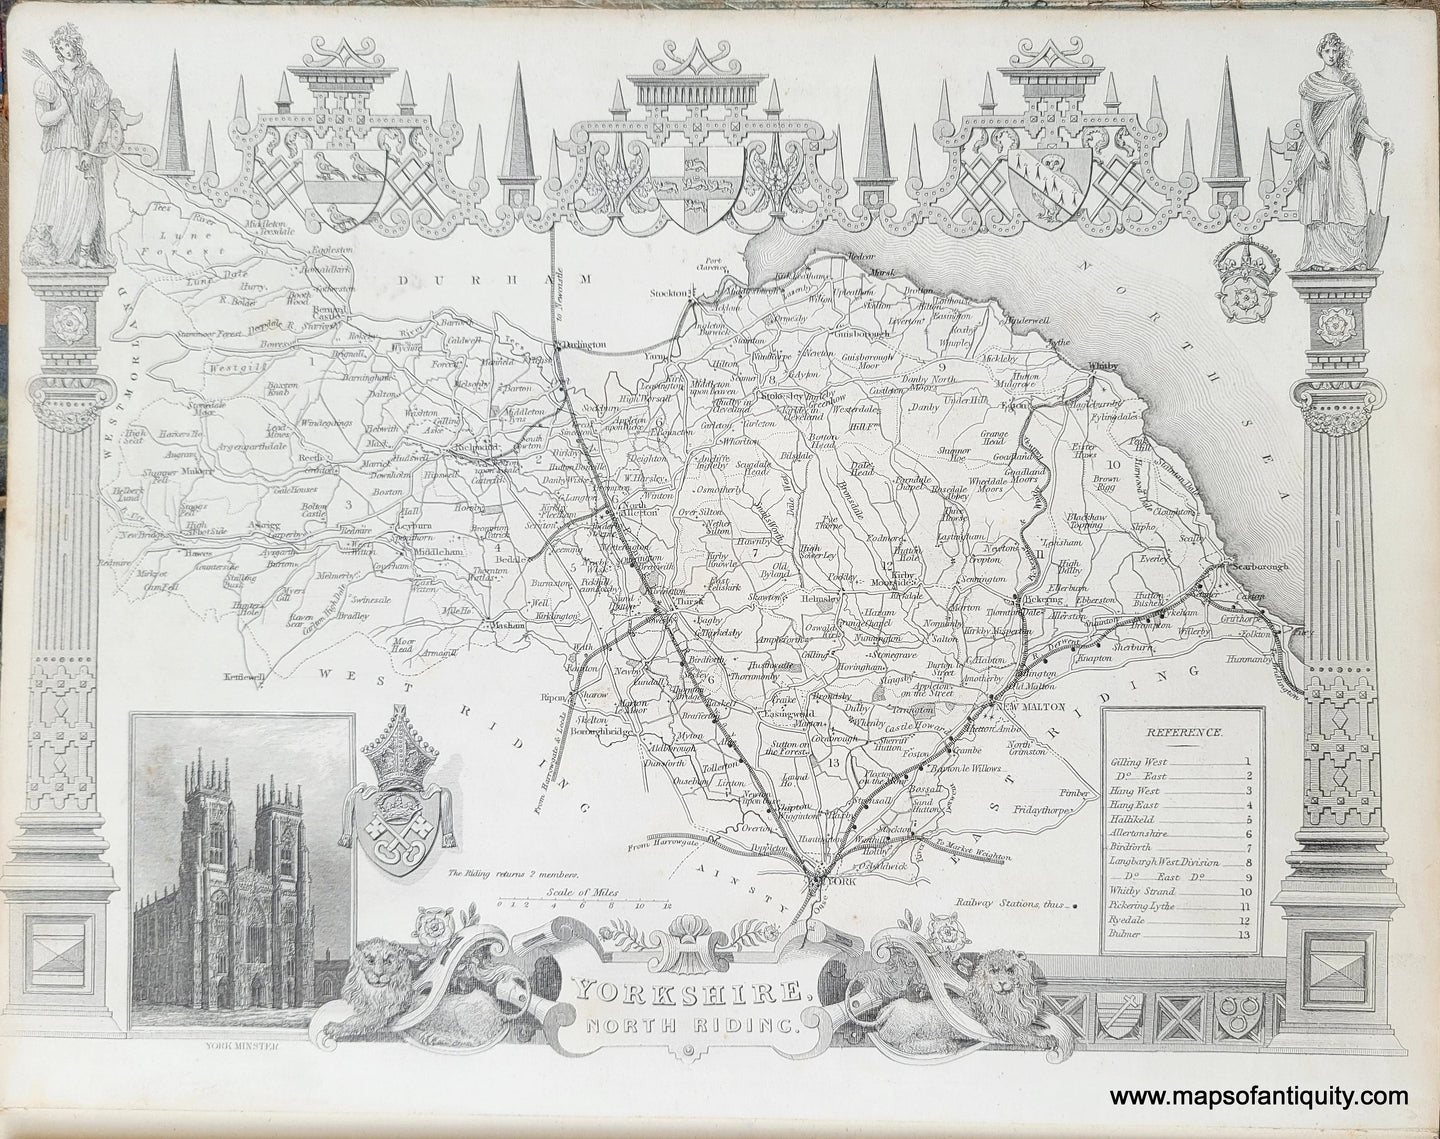 Genuine-Antique-Map-Yorkshire,-North-Riding-1850-Virtue-Maps-Of-Antiquity